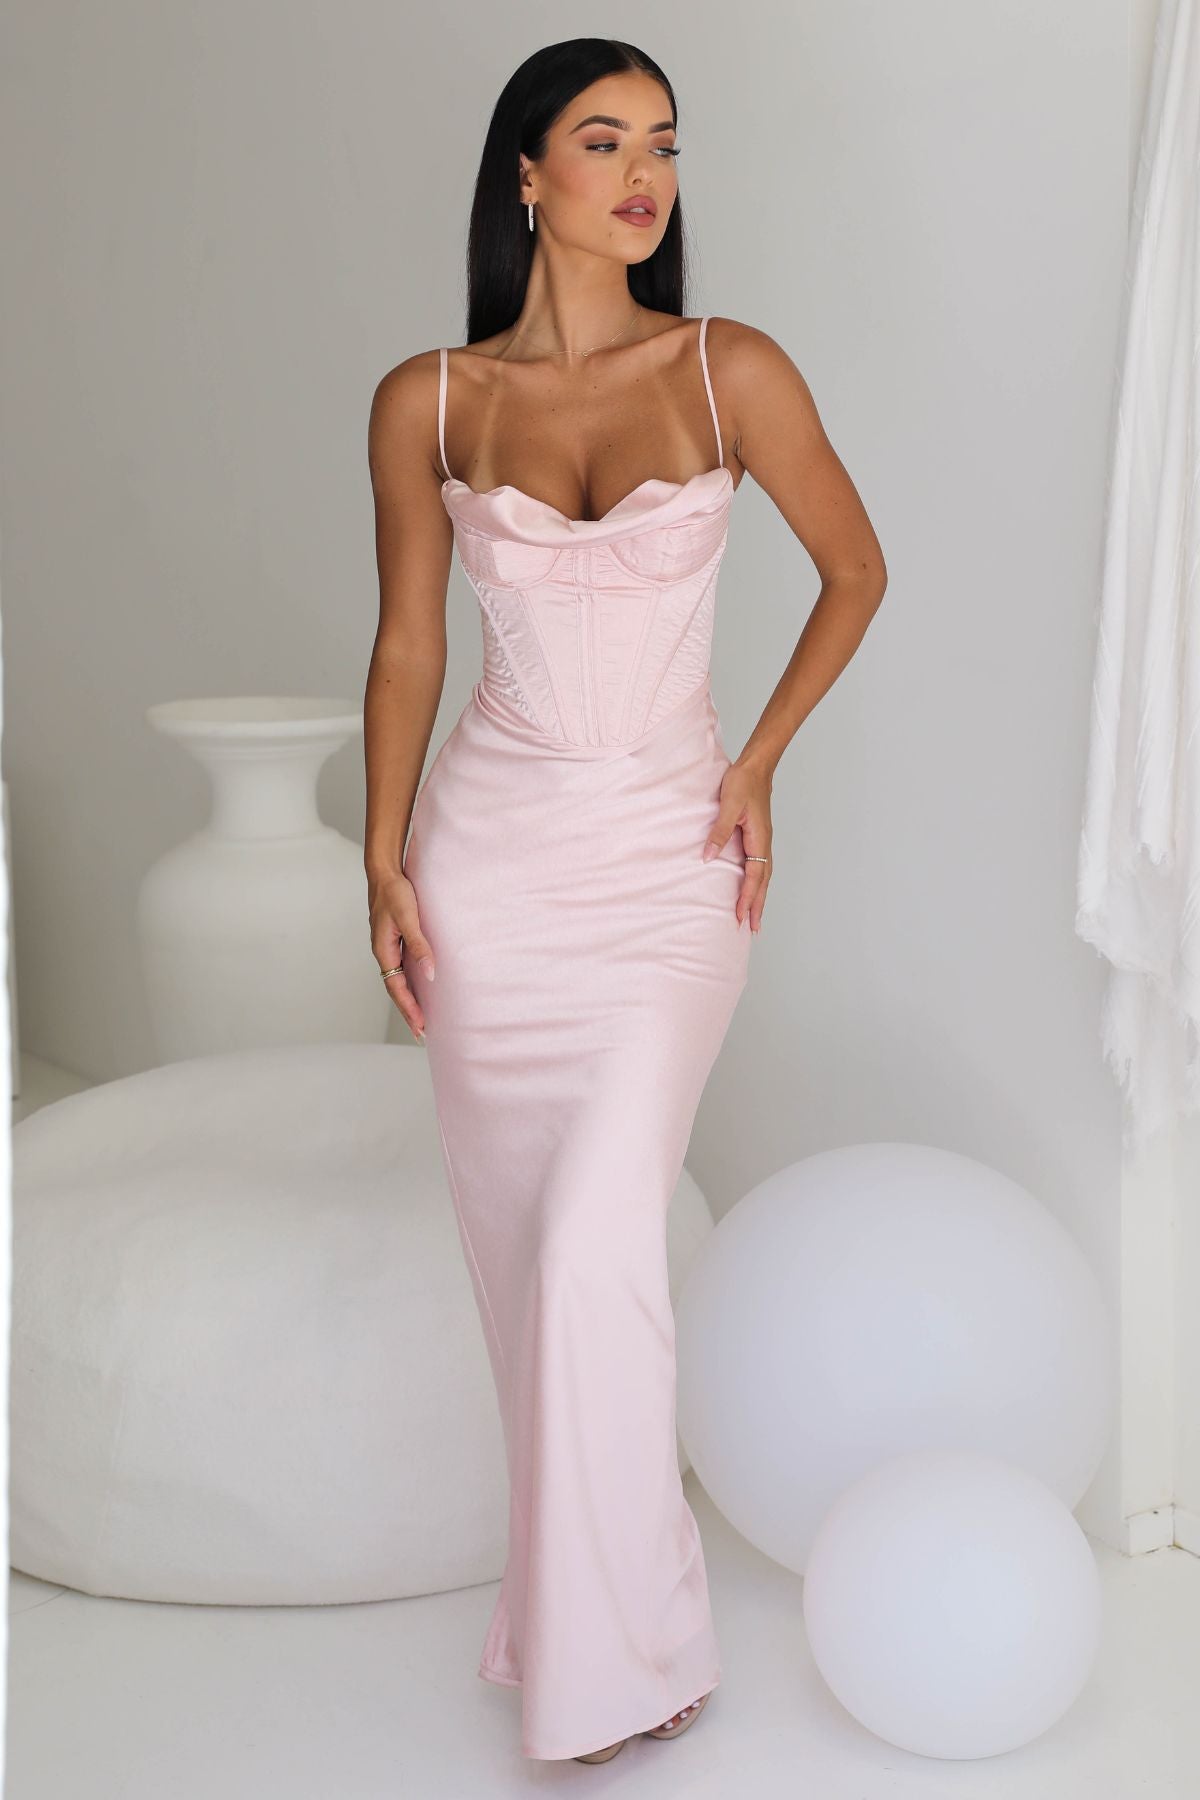 Rent HOUSE OF CB Charmaine Corset Gown (Bush Pink) - Rent this $149